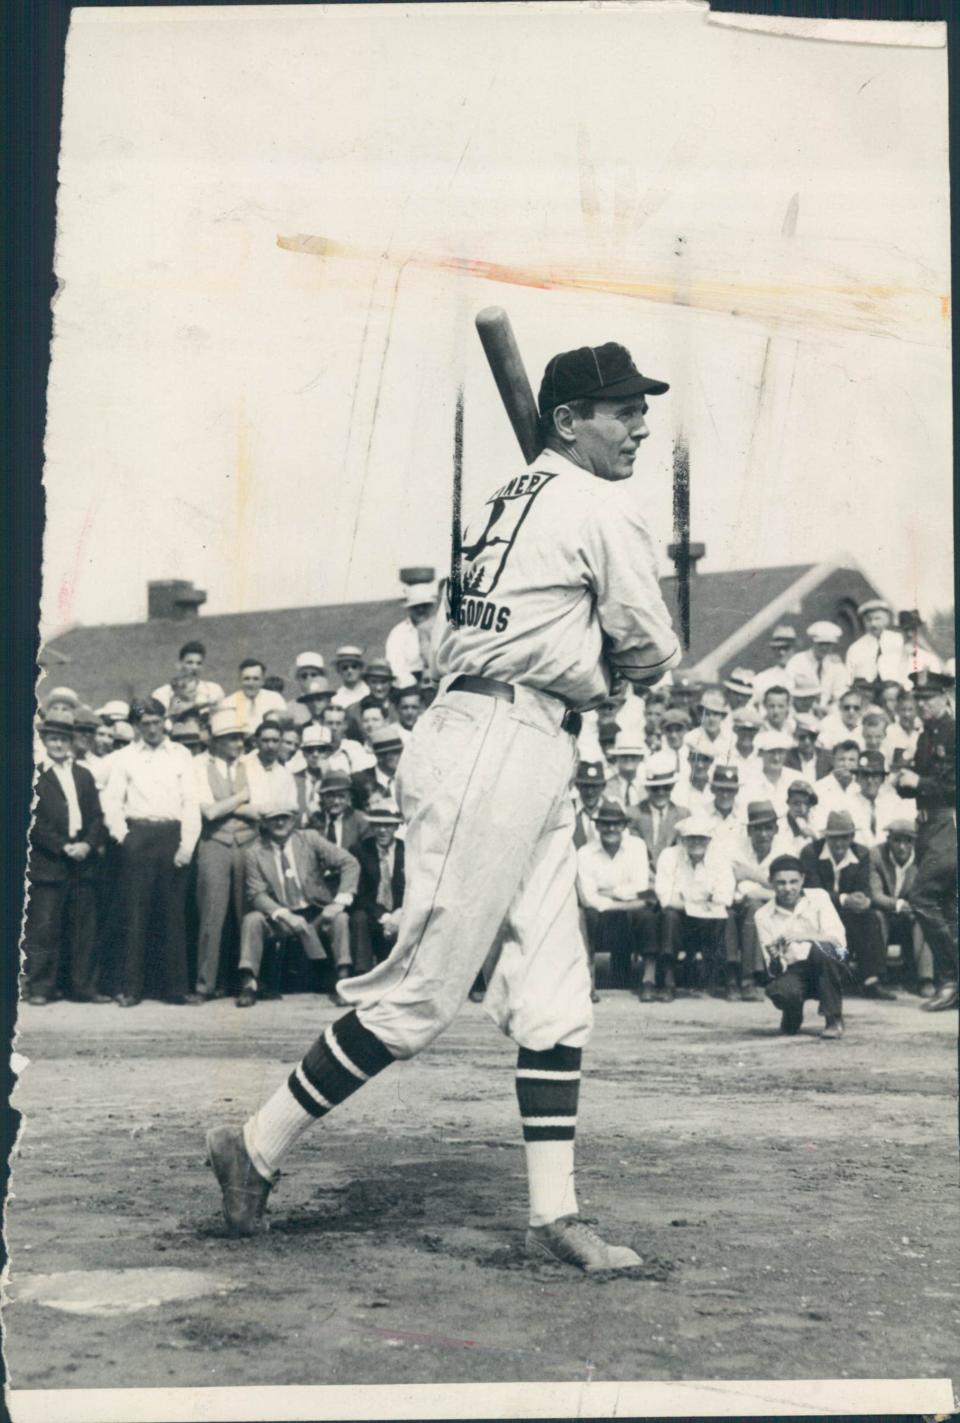 Harry Heilmann had 2,499 hits with the Detroit Tigers.